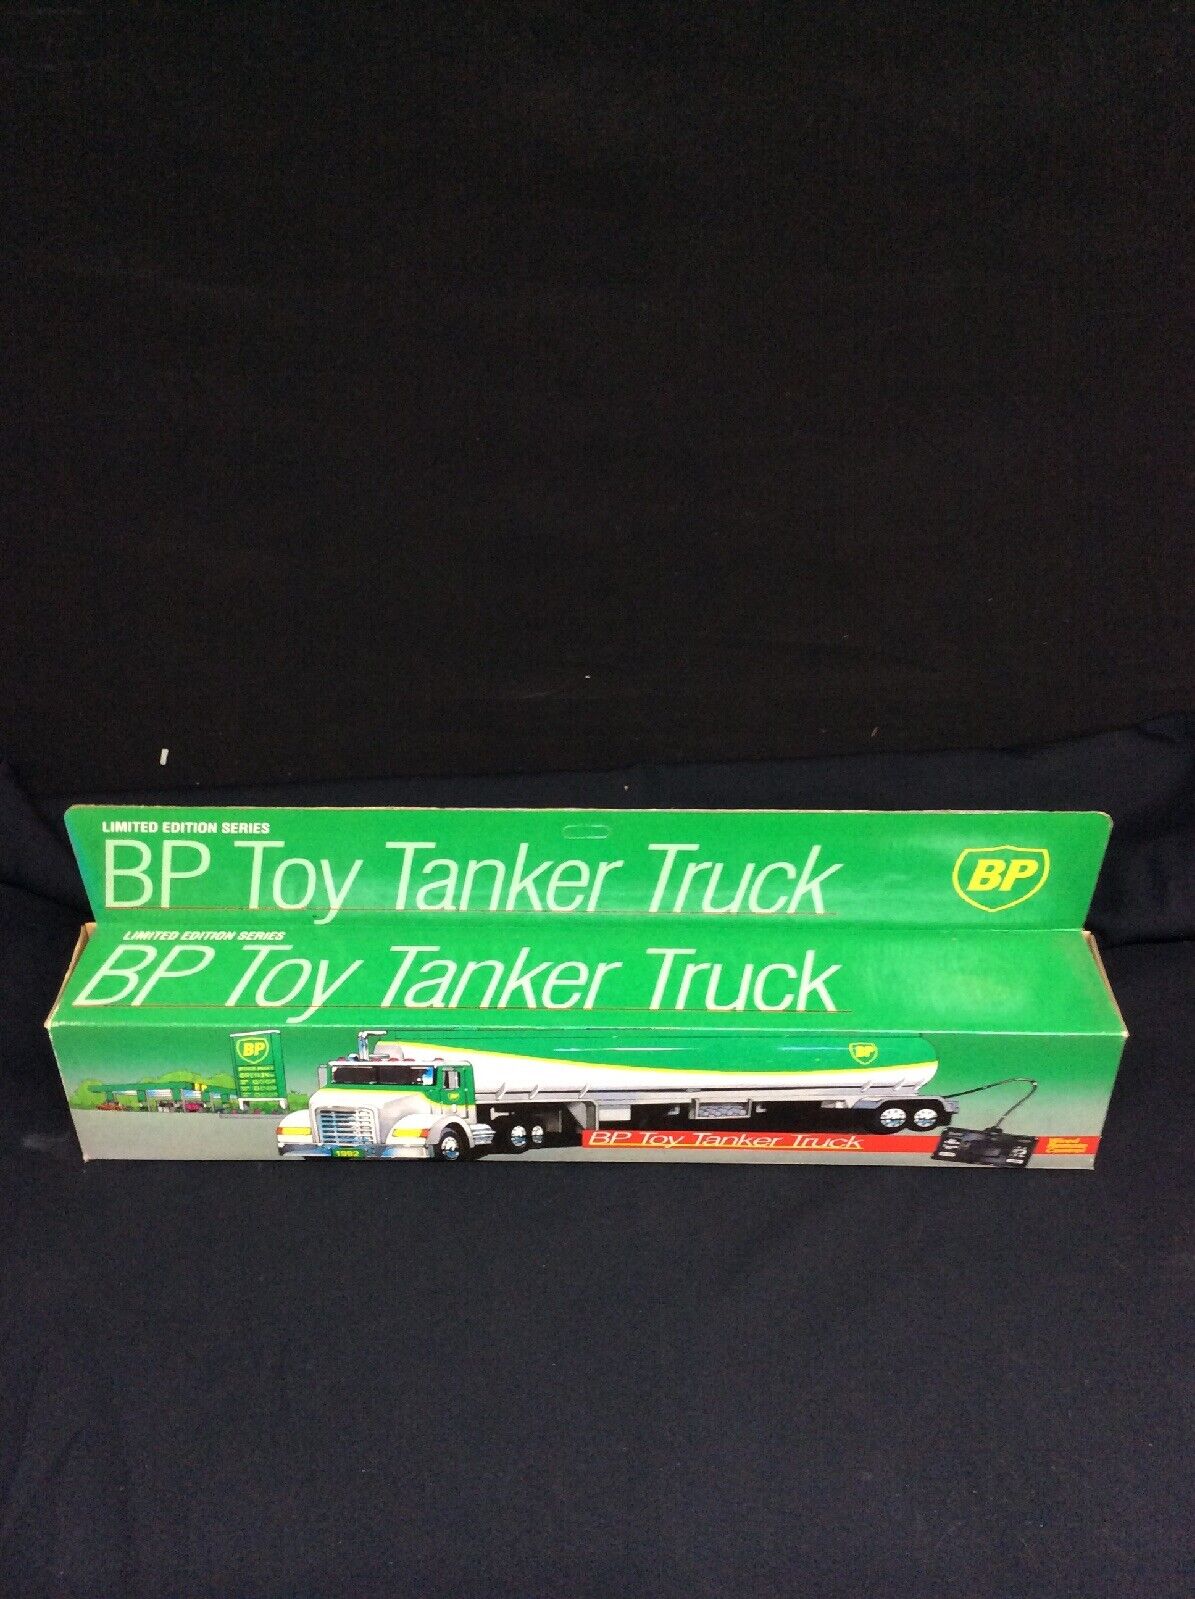 BP toy tanker truck,never out of box, wired remote, box,1992 NOS limited series